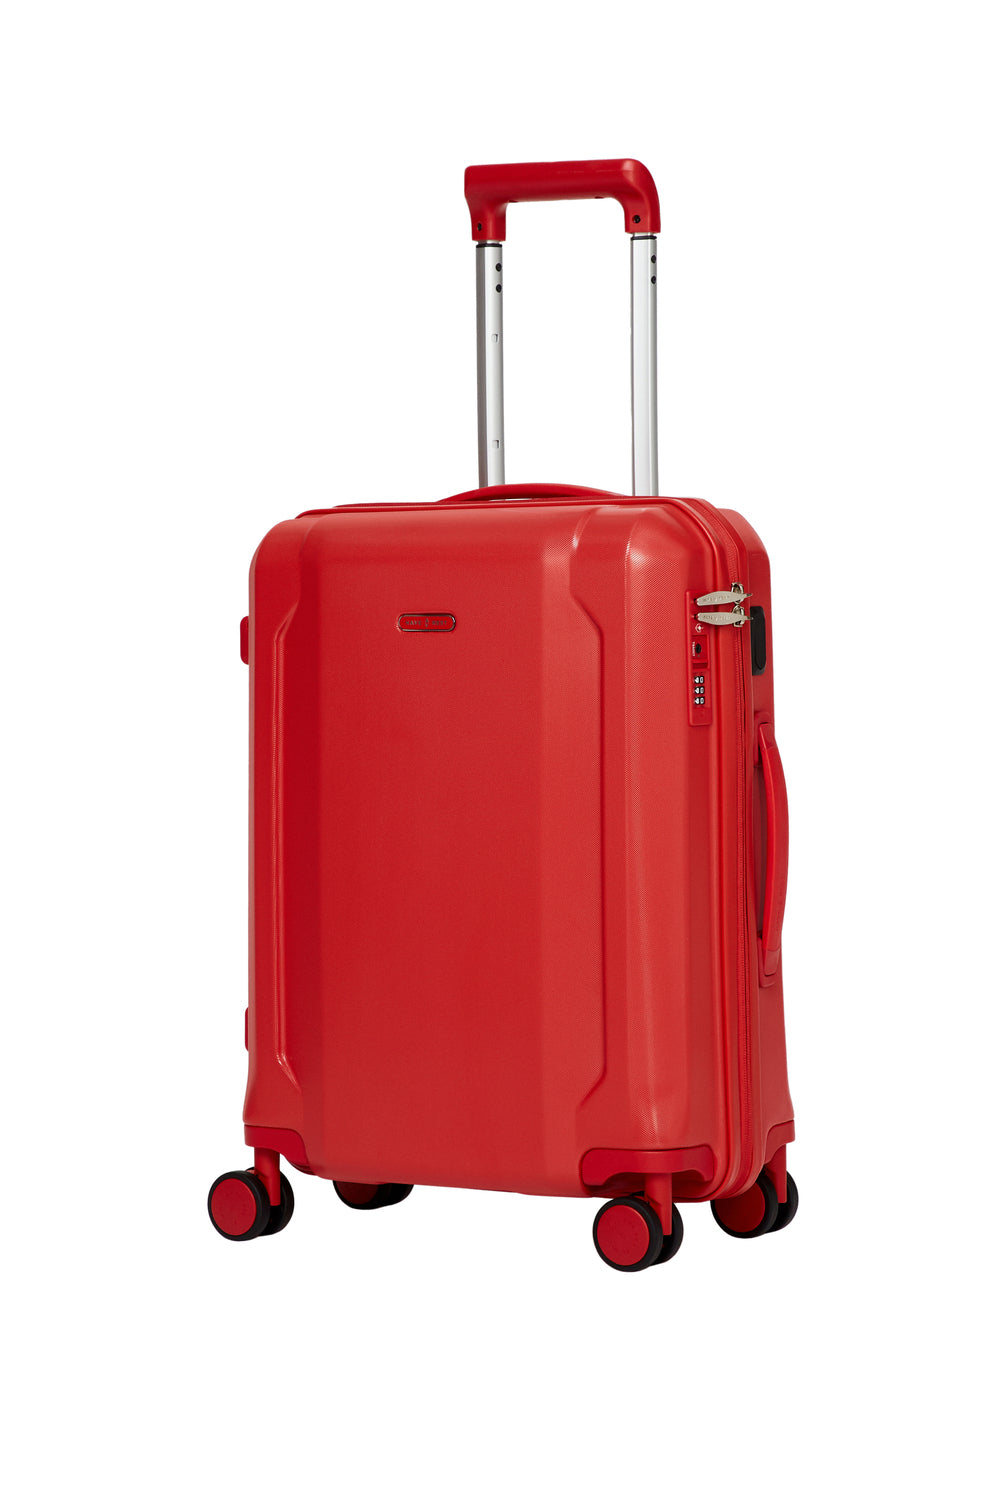 Smart suitcase Small size Red Kiss HAVE A REST